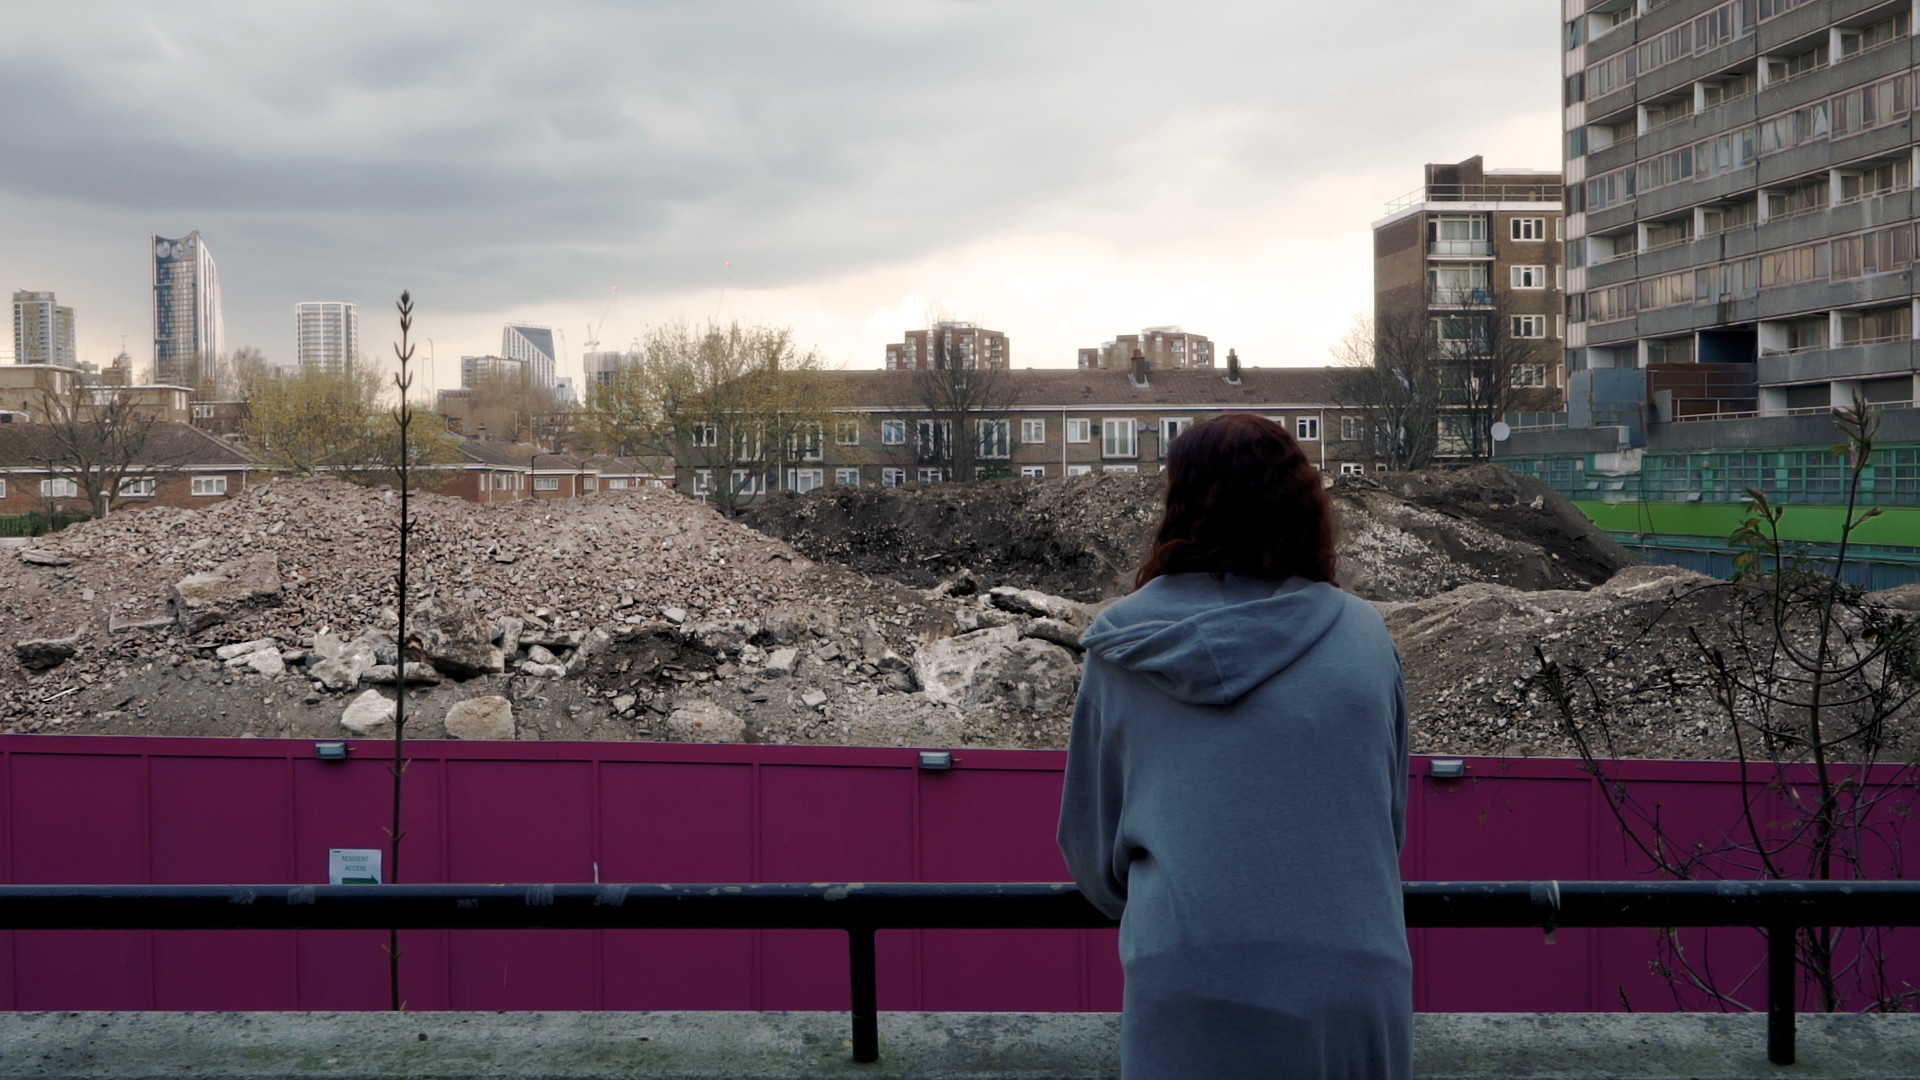 Frame from the film Aylesbury Estate (2020).